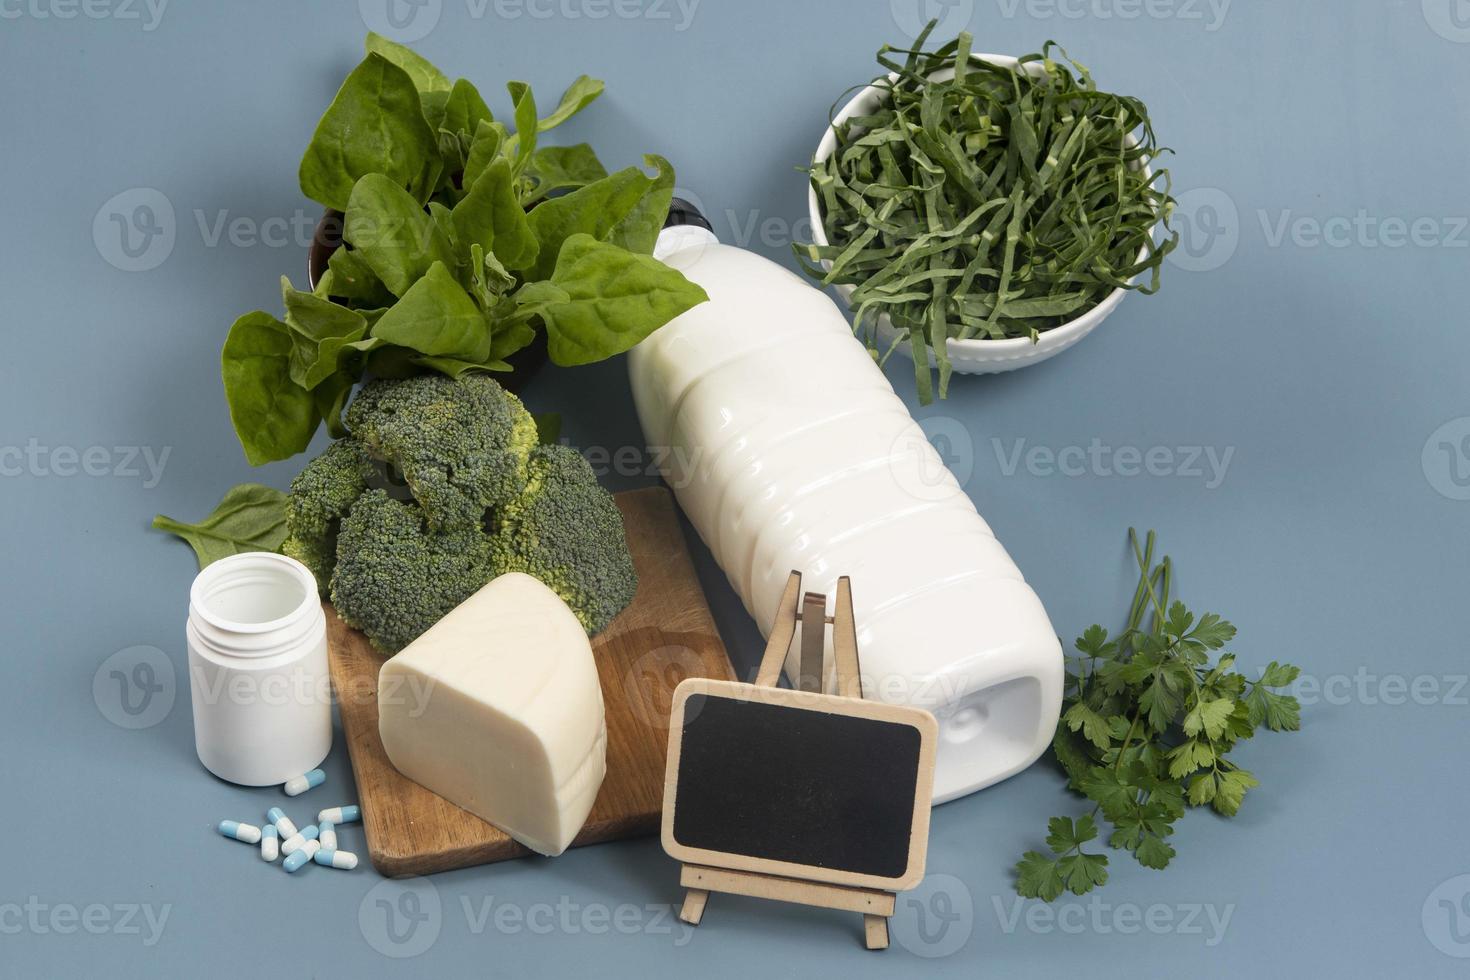 main sources of calcium for the body to help fight osteoporosis, photo